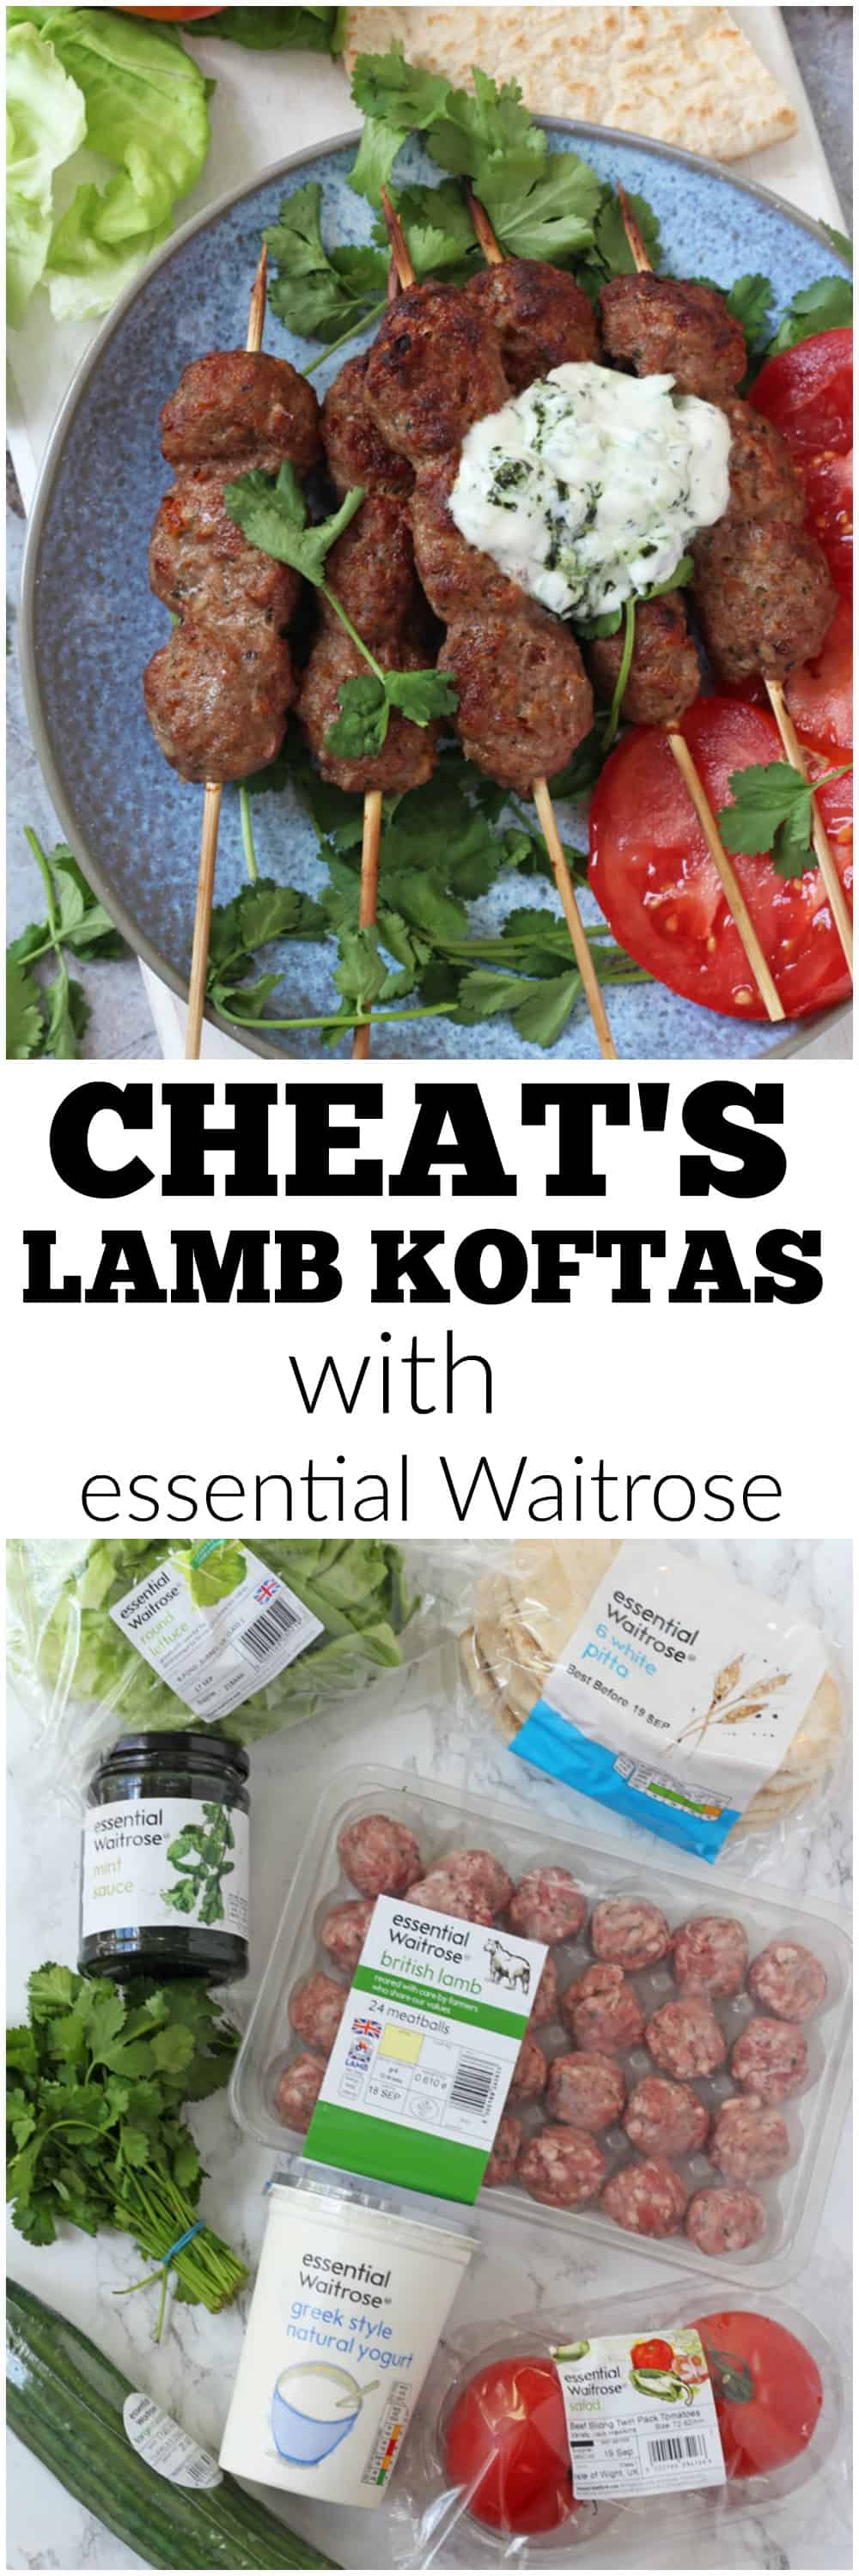 Lamb Koftas for dinner made super easy with my little cheat's hack using essential Waitrose ingredients